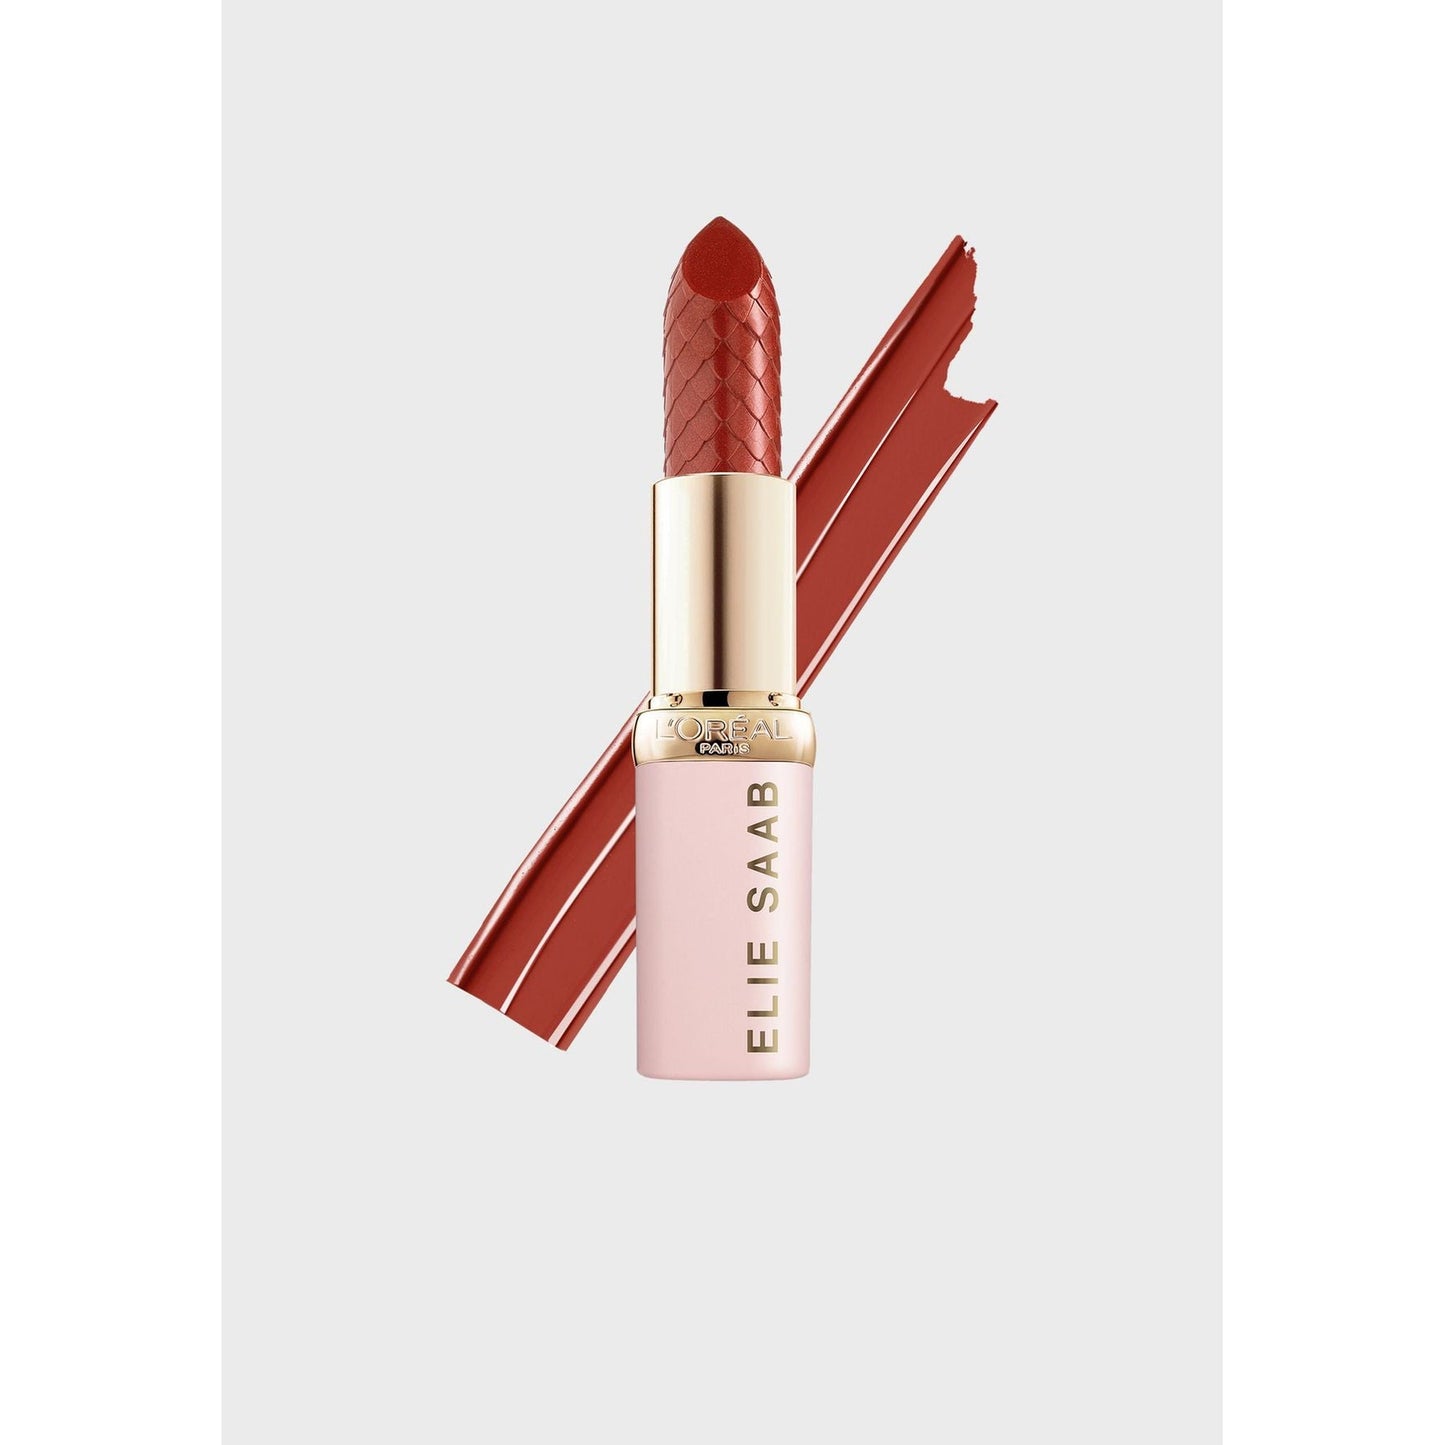 Elie Saab Limited Edition Color Riche Lipstick, Rose Bang 03 Pink Nude-L'Oreal-BeautyNmakeup.co.uk